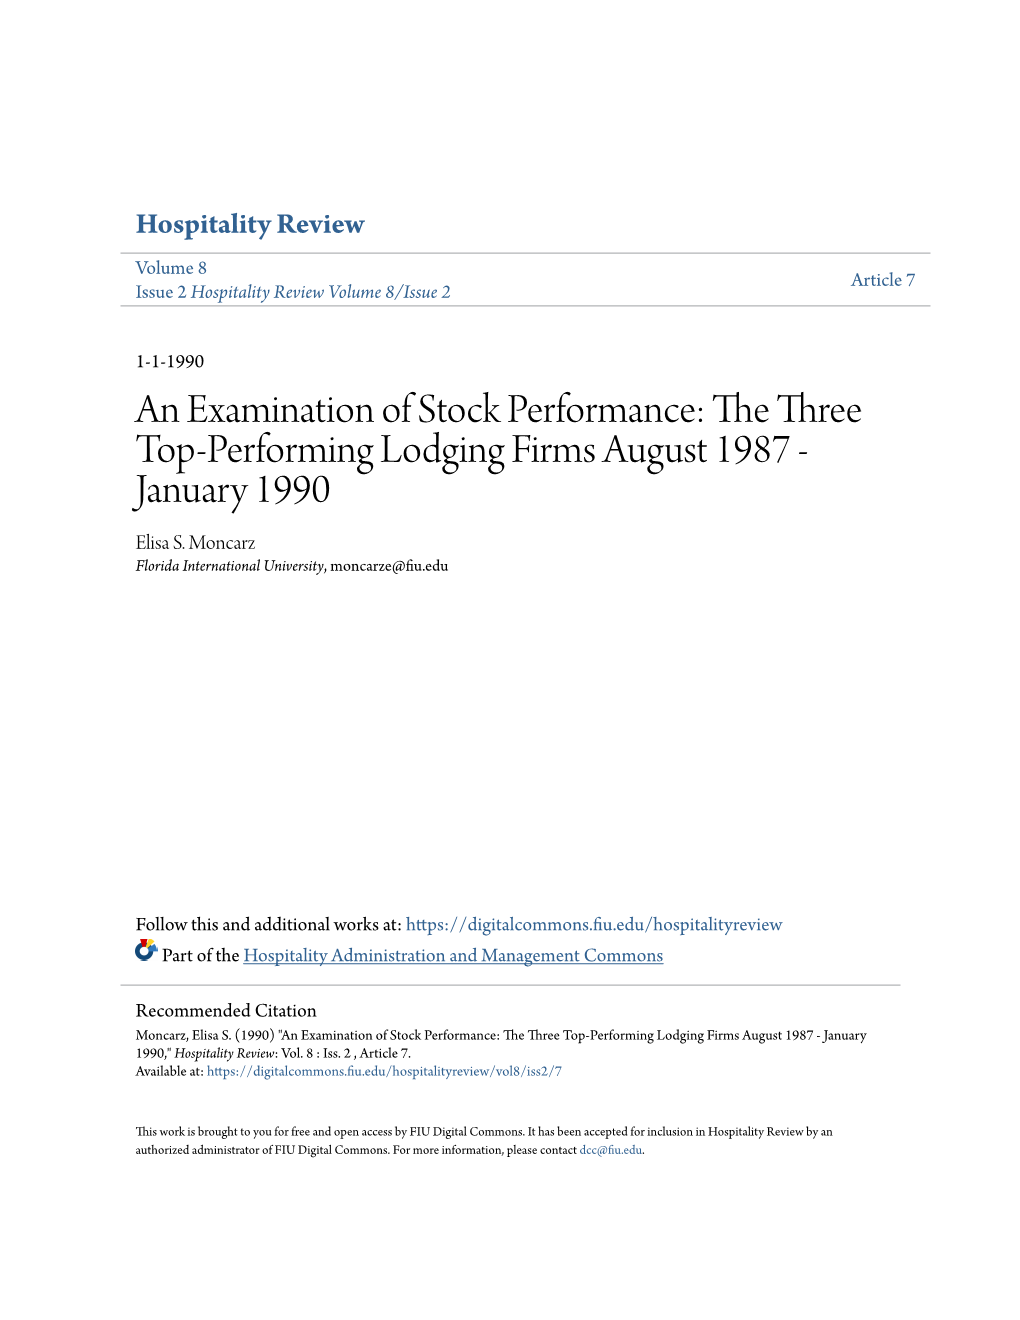 An Examination of Stock Performance: the Three Top-Performing Lodging Firms August 1987 - January 1990 Elisa S